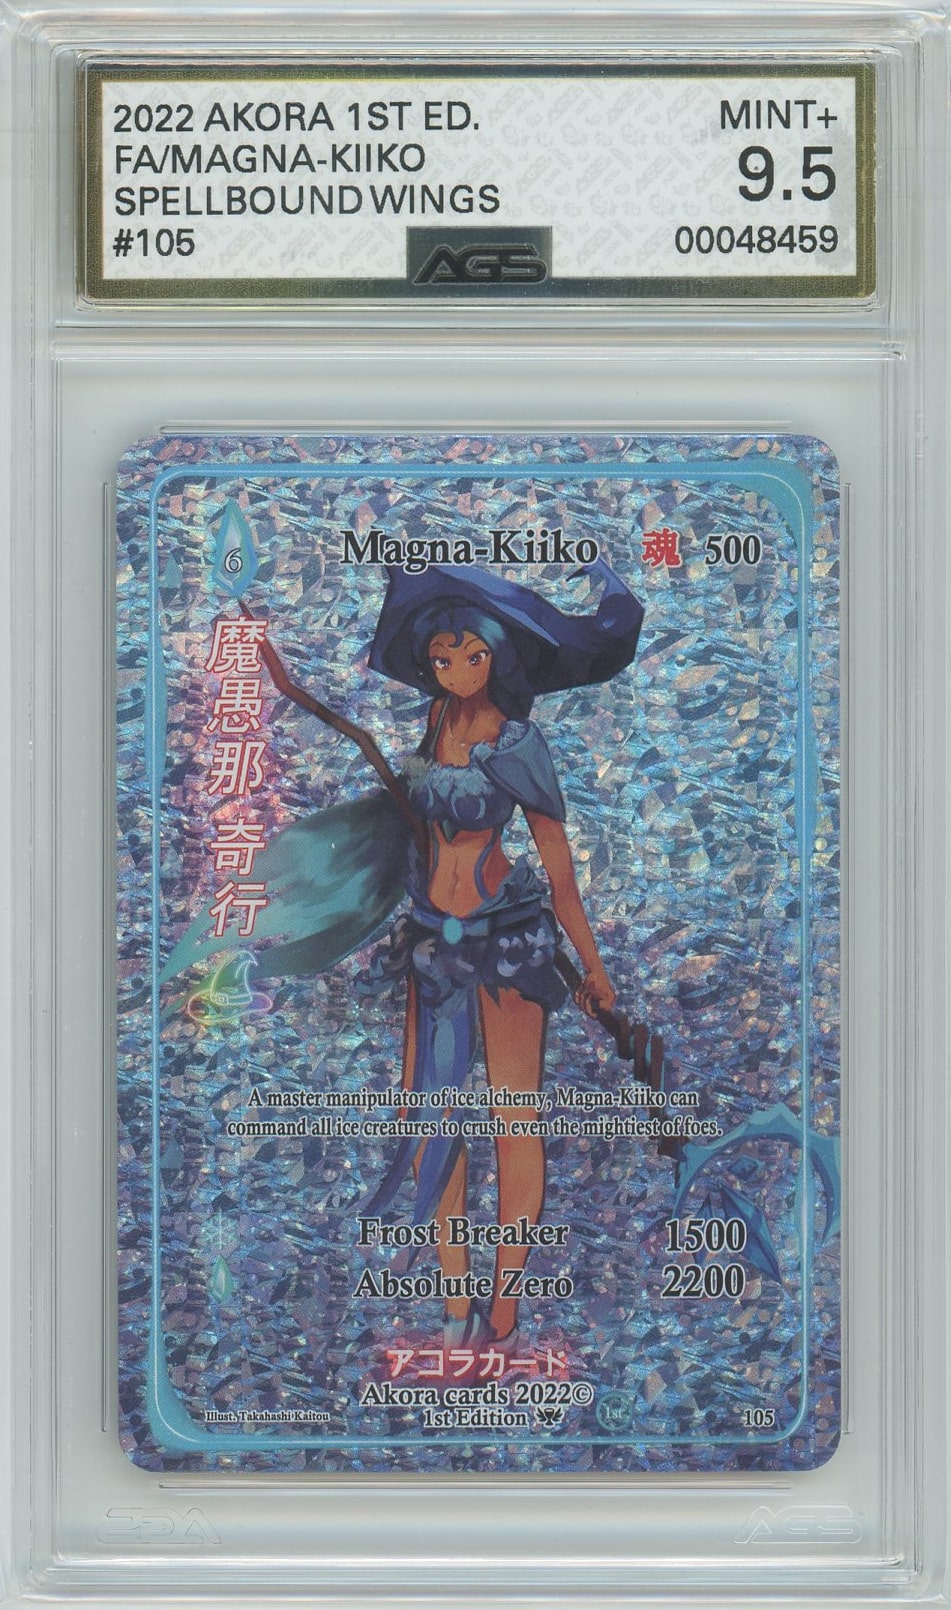 AGS (MINT+ 9.5) Magna-Kiiko #105 - Spellbound Wings (#00048459)